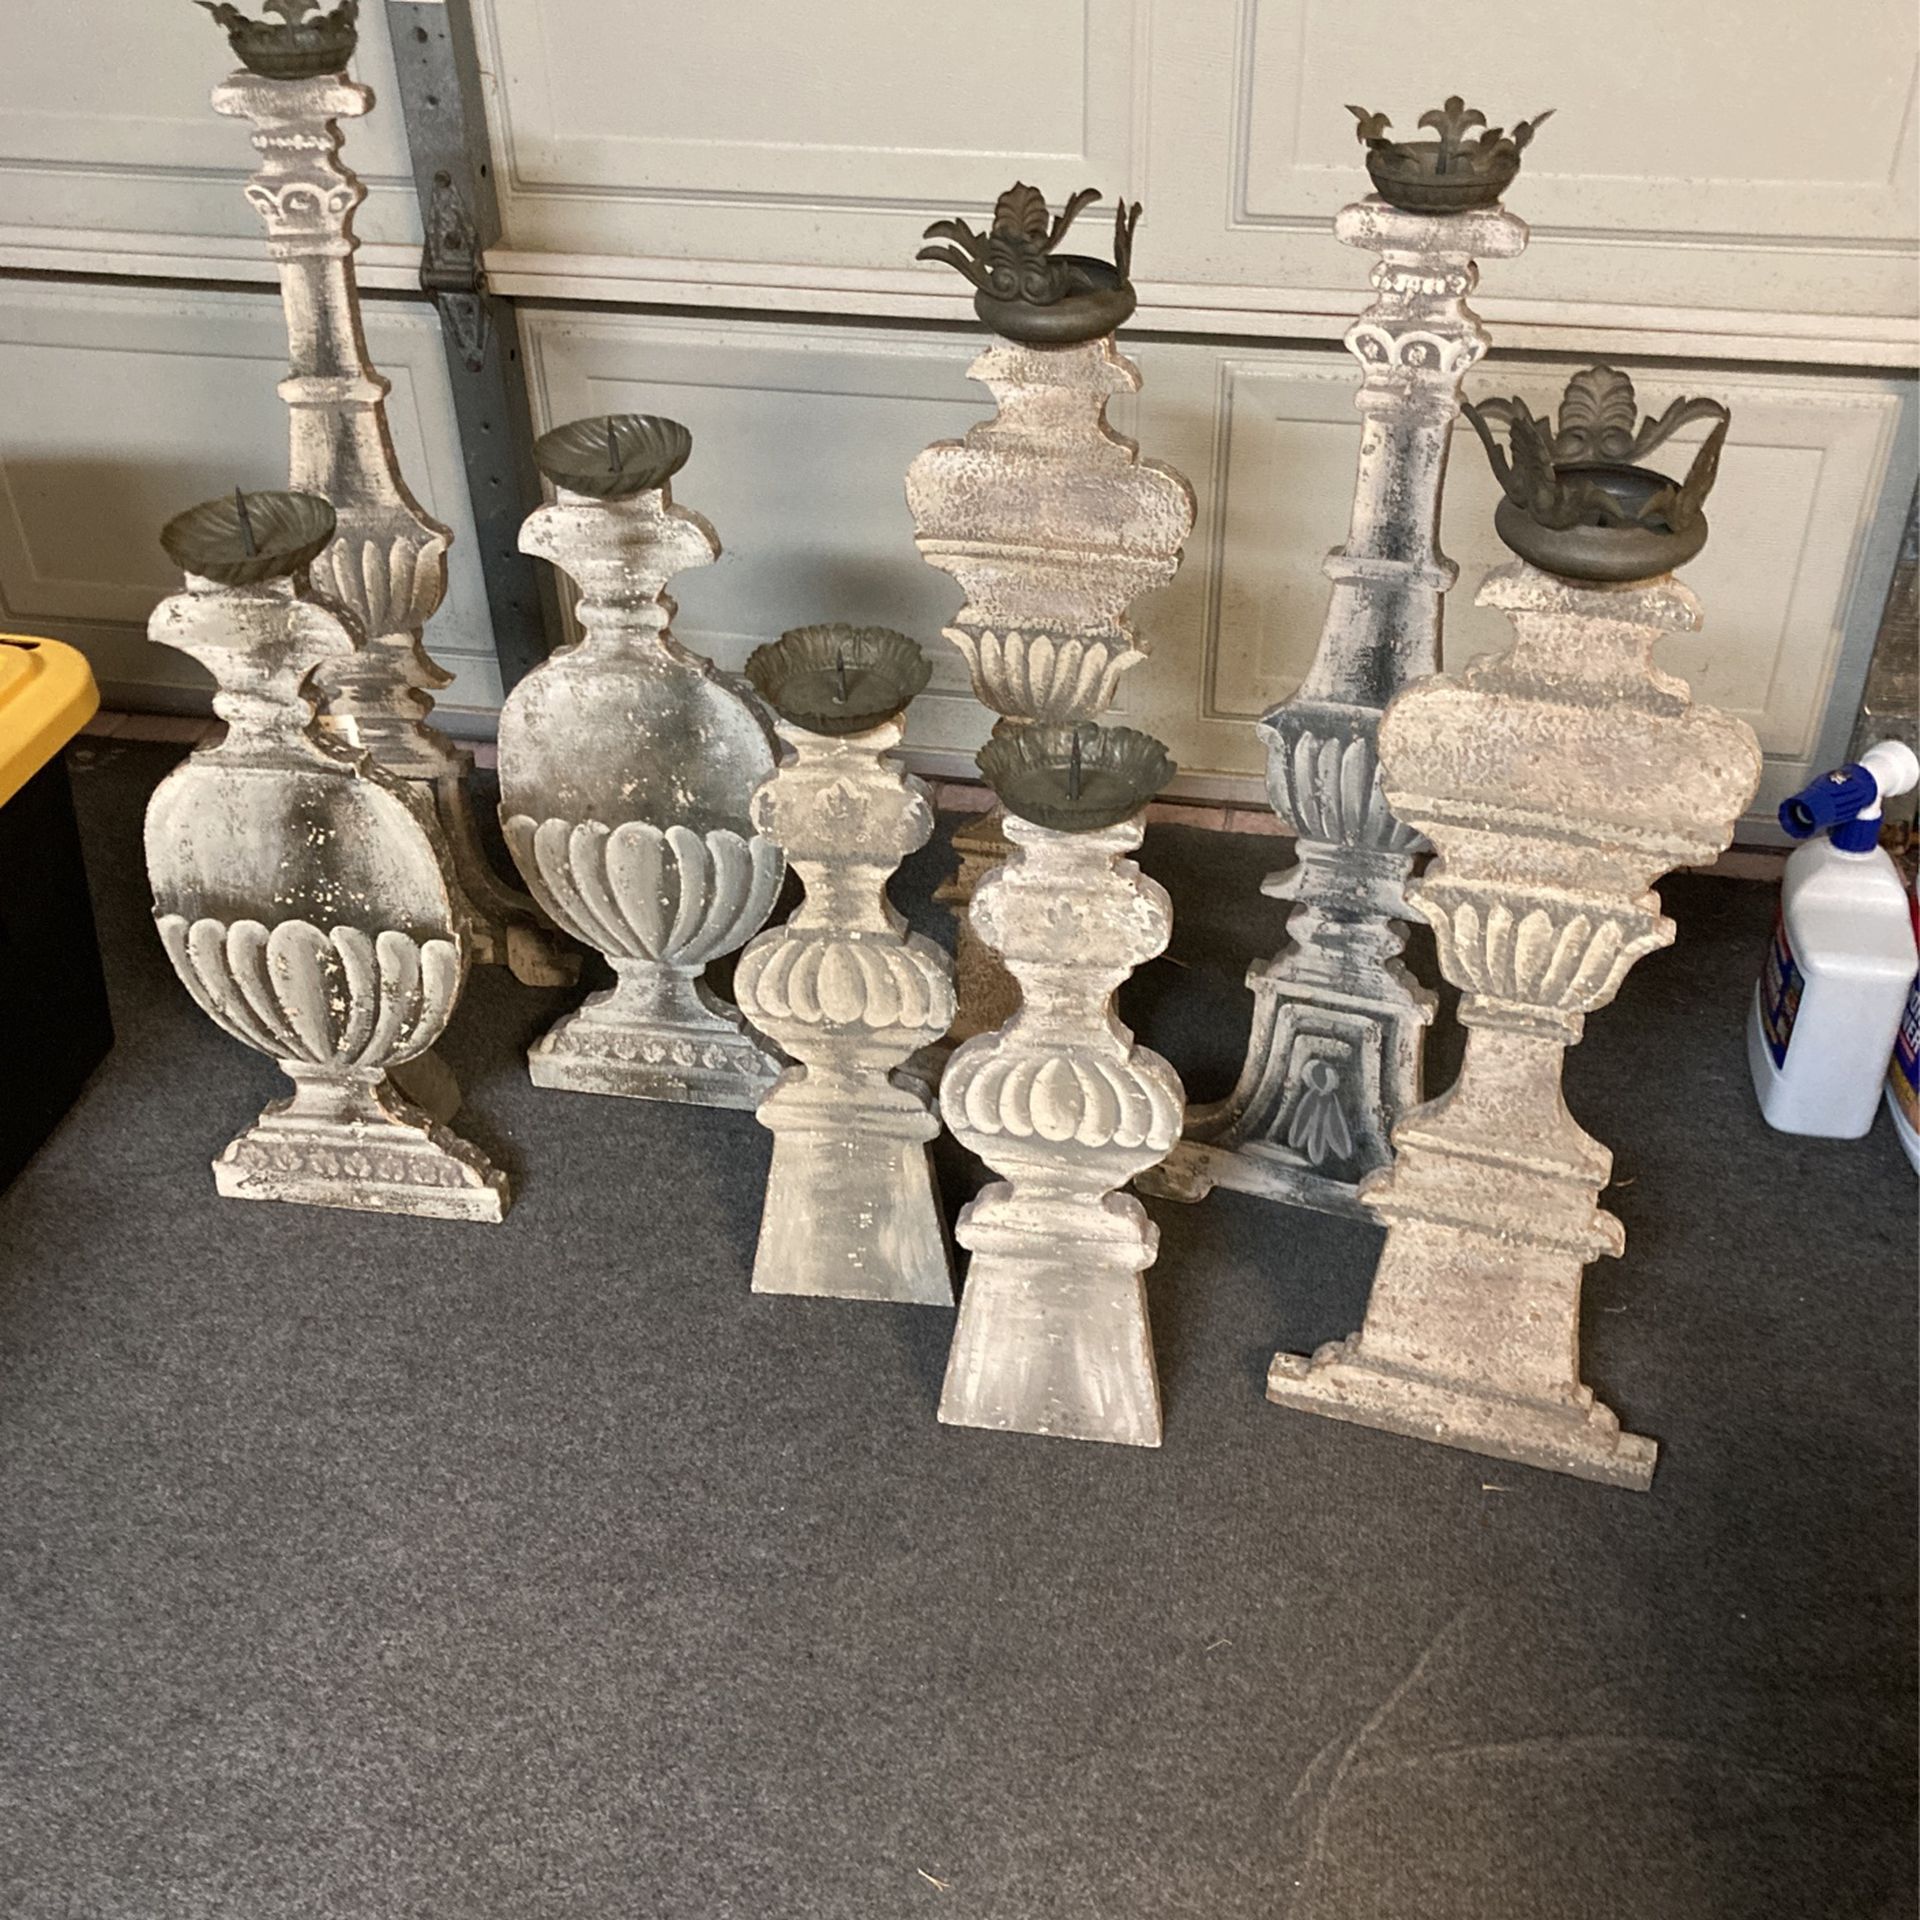 $100 Per Pair.  FABULOUS PALM BEACH MANSION Designer Decorator Architecture Pieces. Wood & Metal. Especially Great With Pillar & Battery Candles.  